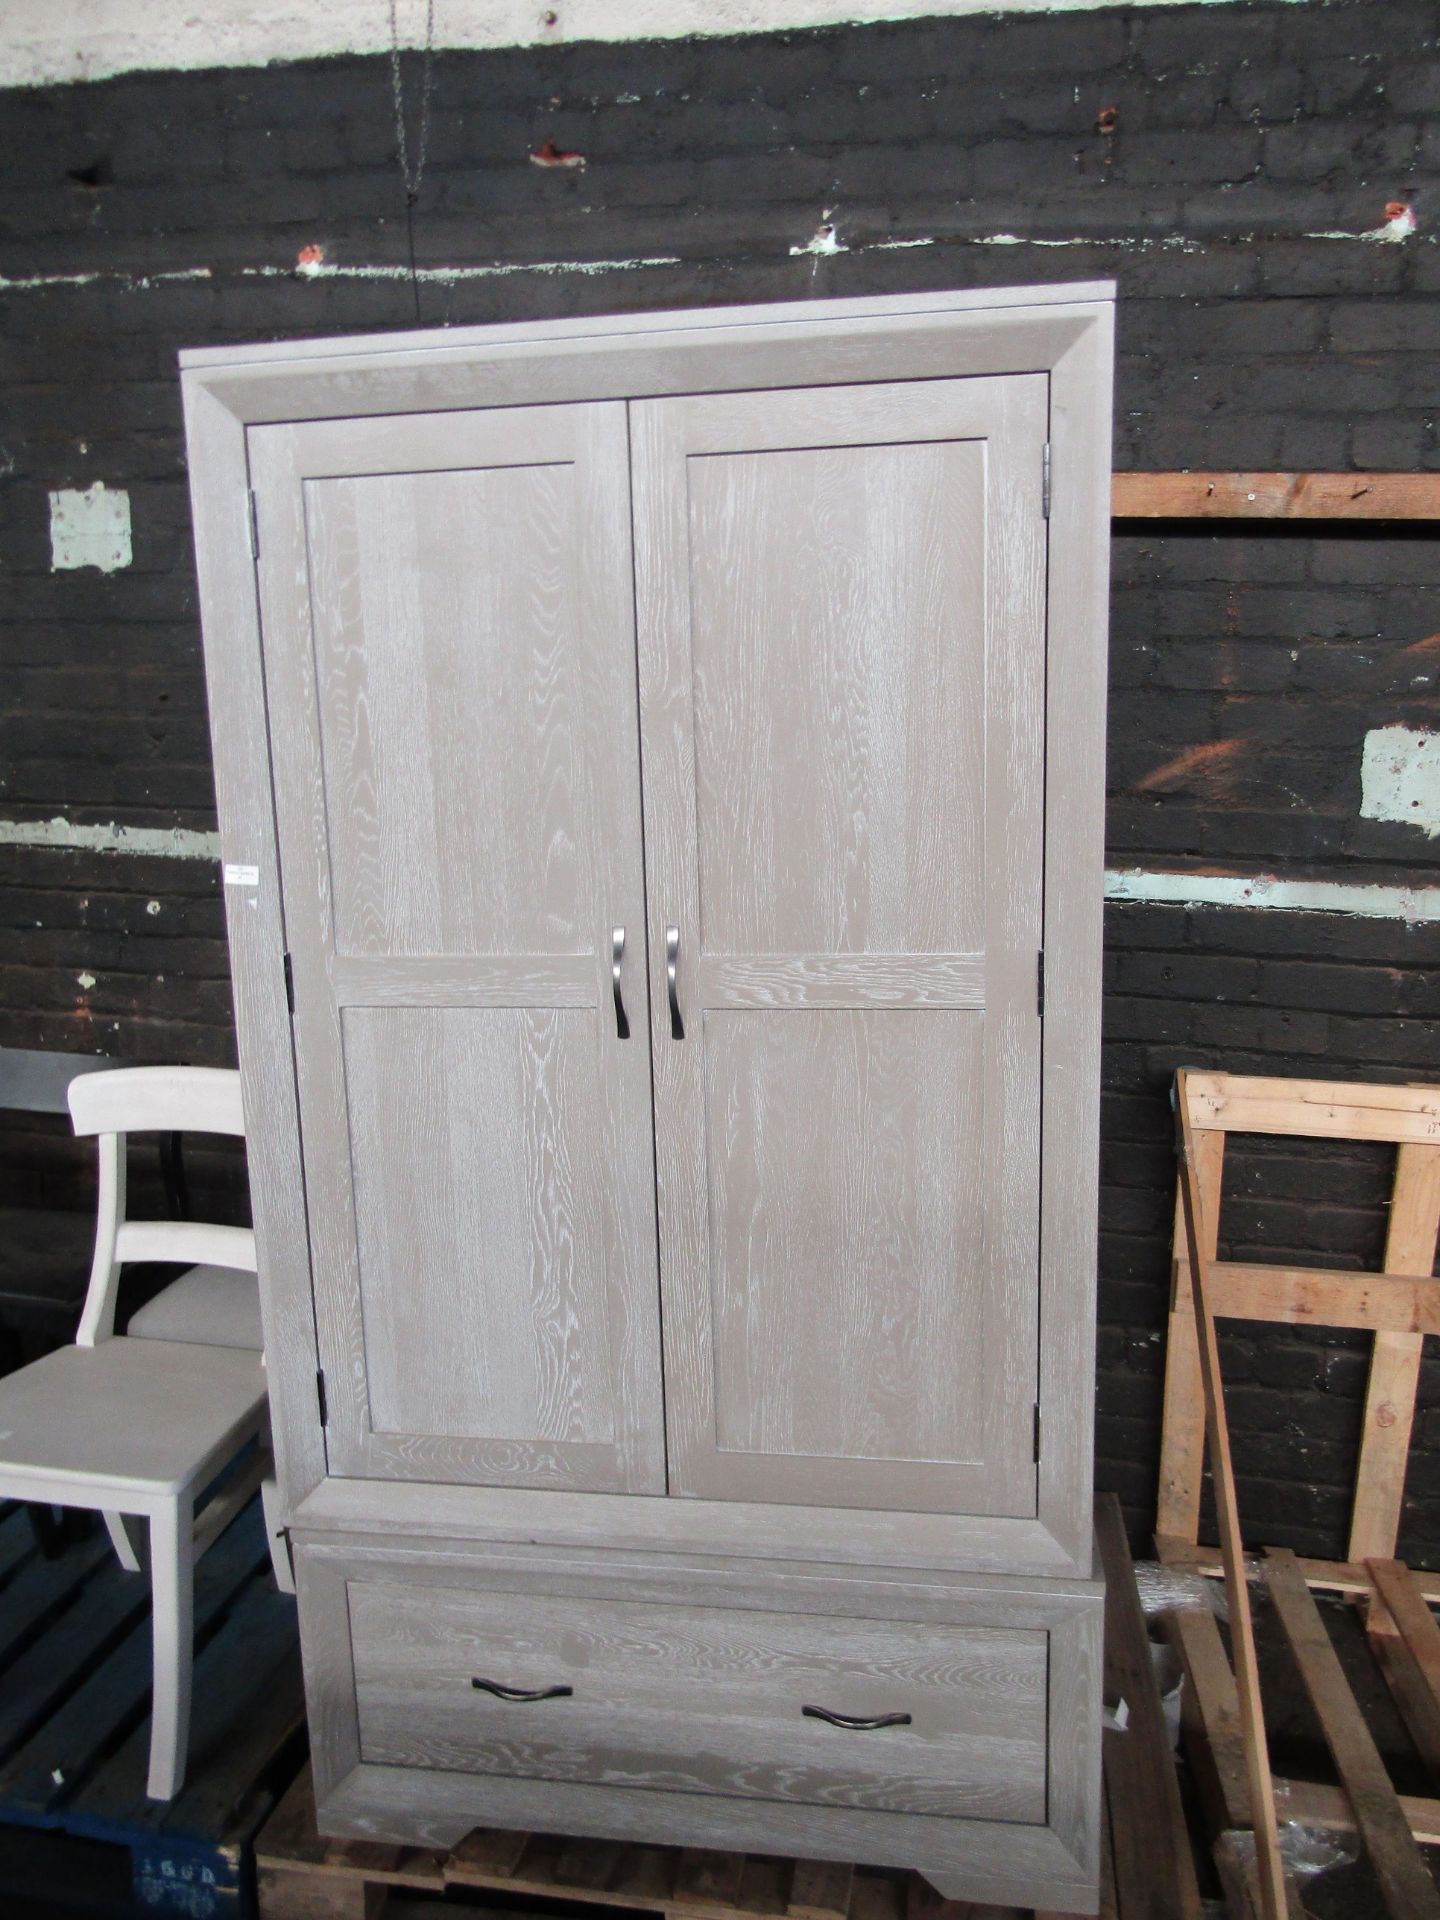 Oak Furnitureland Willow Light Grey Double Wardrobe Solid Oak RRP 799.99 This product has been